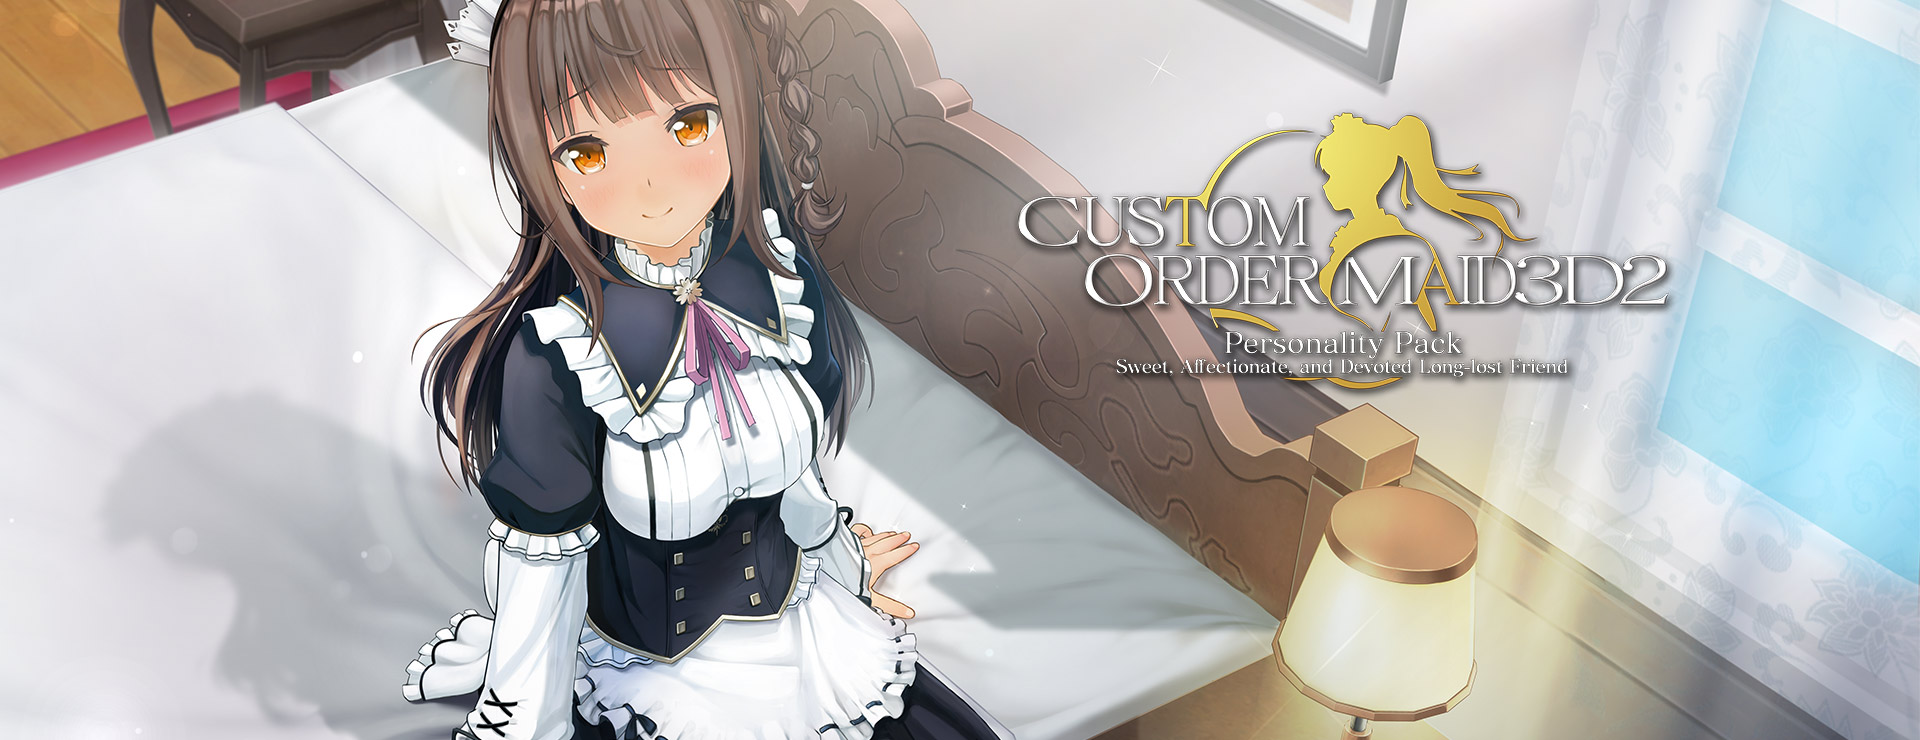 Custom Order Maid 3D 2 - Sweet, Affectionate, and Devoted Long-Lost Friend DLC - Symulacja Gra